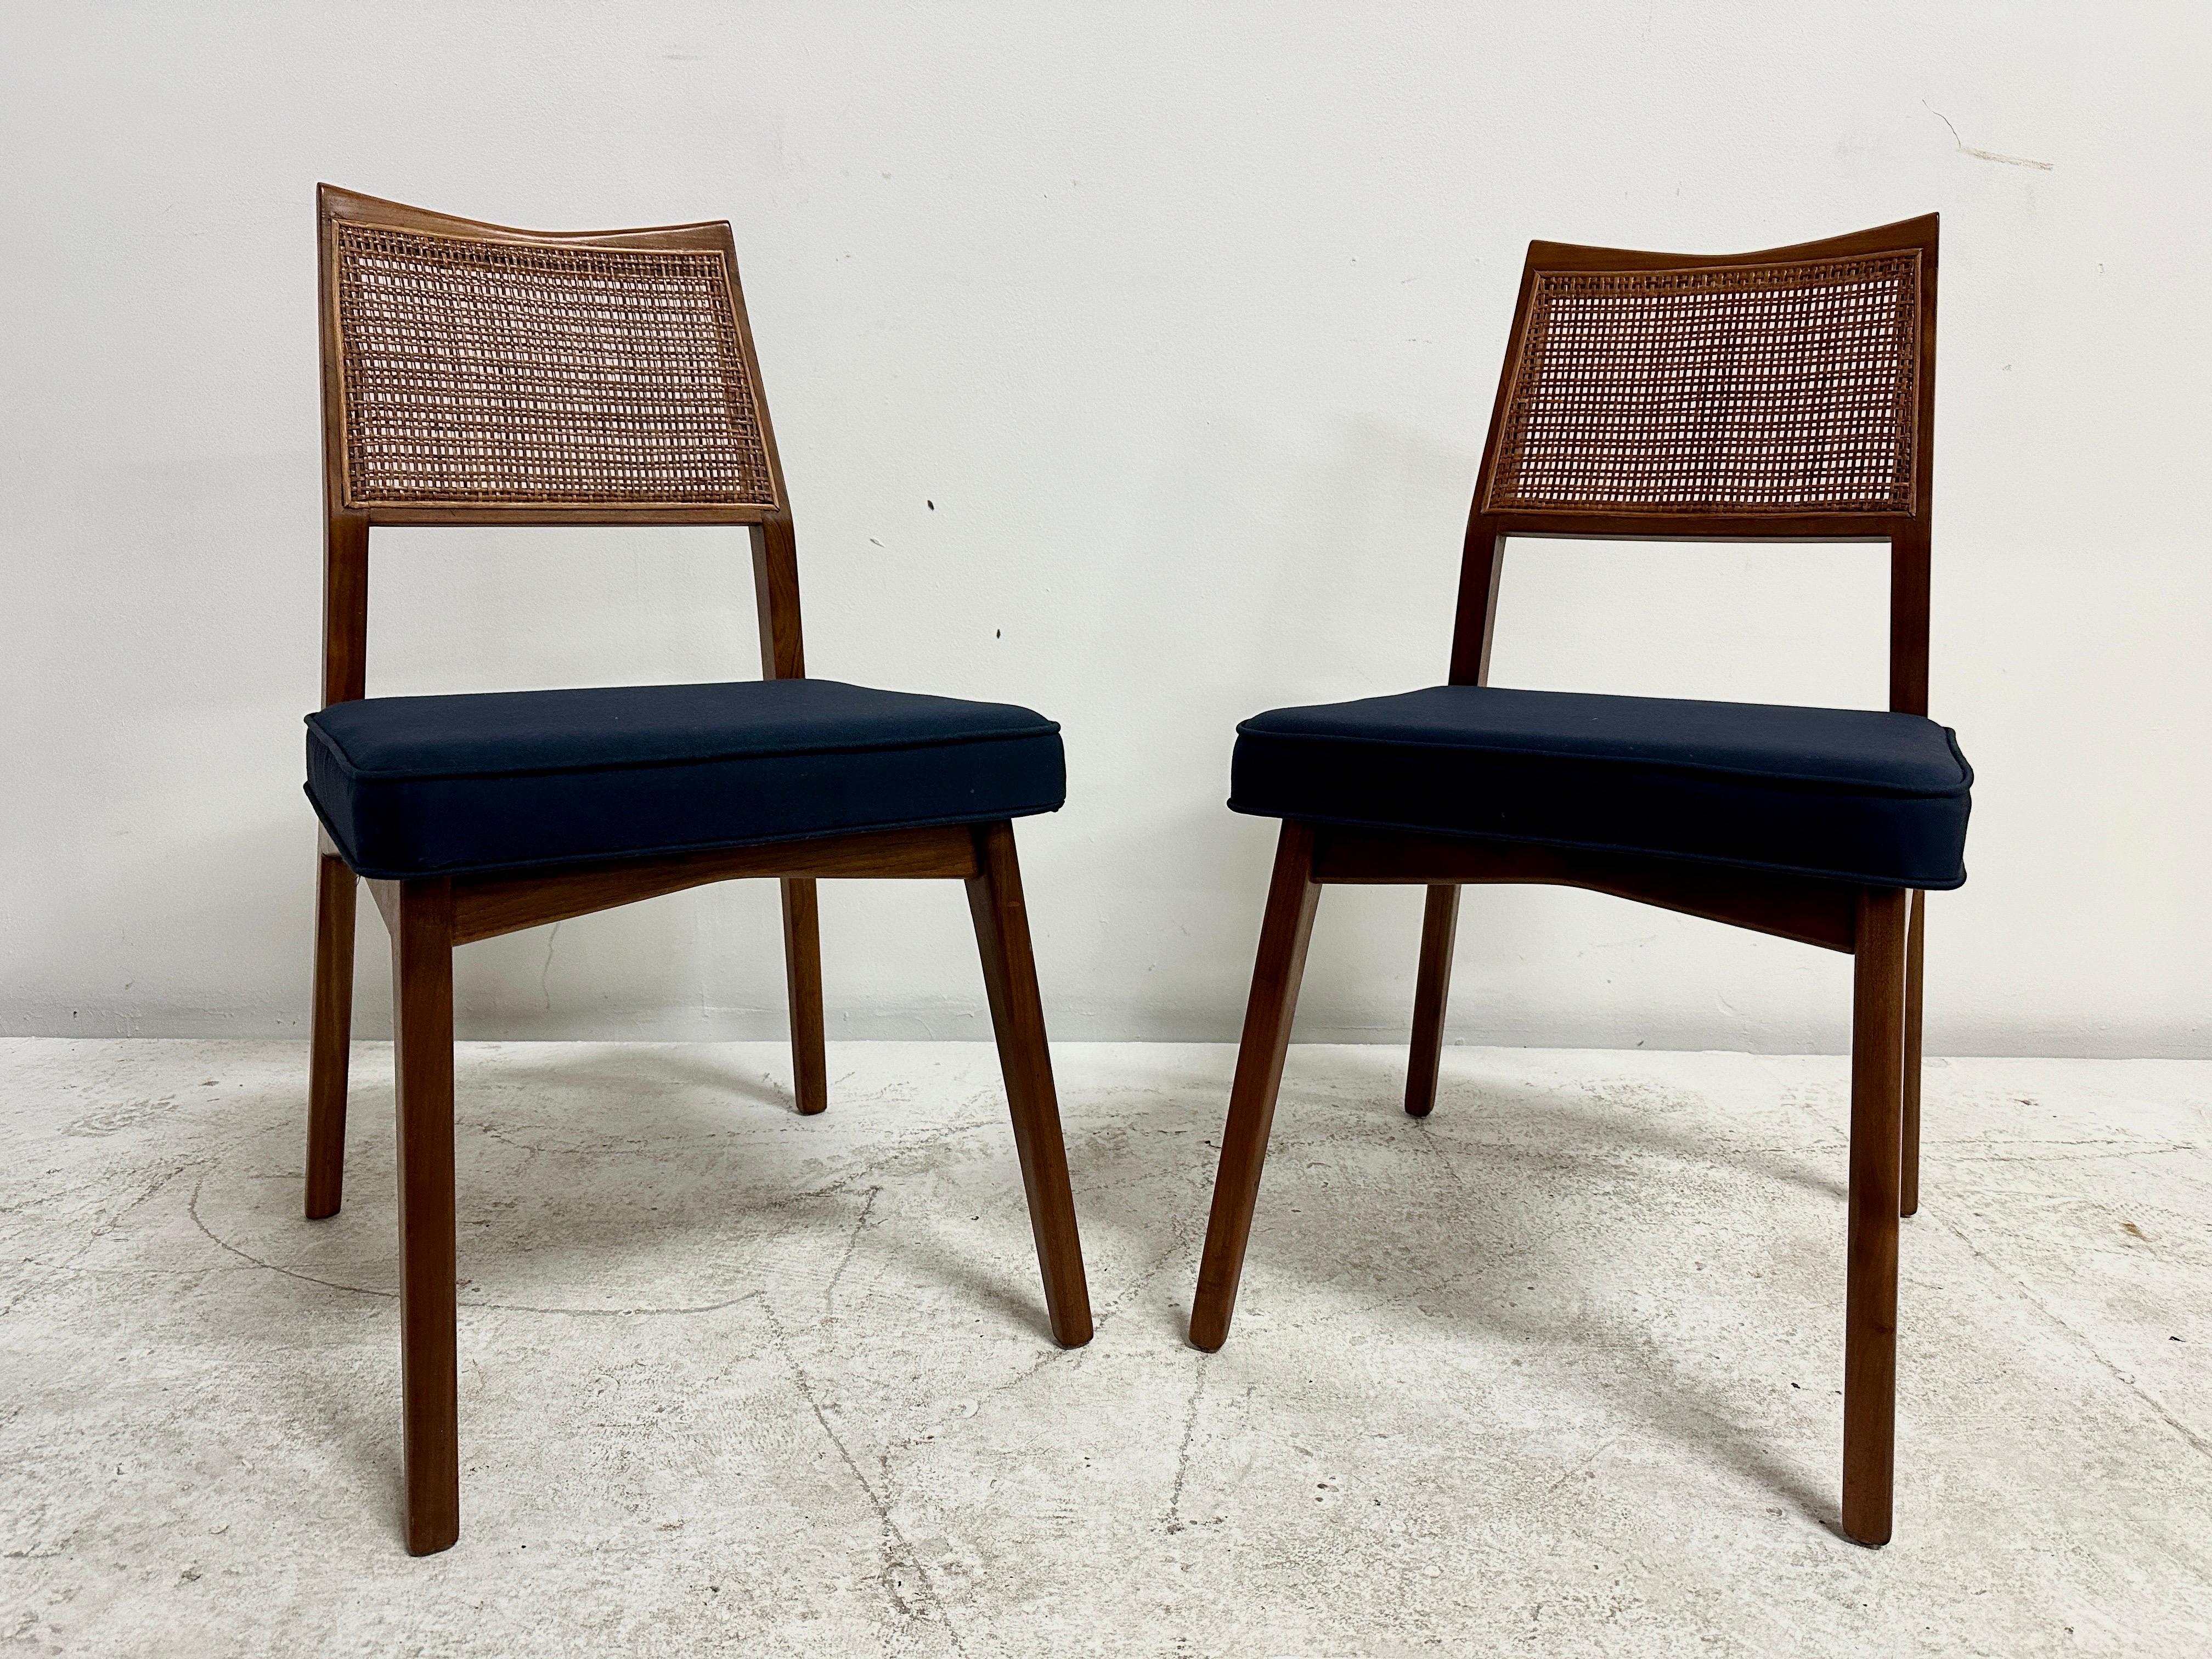 This wonderfully perfect mid-century modern pair of side chairs in the style of Paul McCobb, boast an intact woven cane backrest, walnut kick-back chair frame and relatively unused deep blue fabric seats.  Great for extra seating, host/hostess